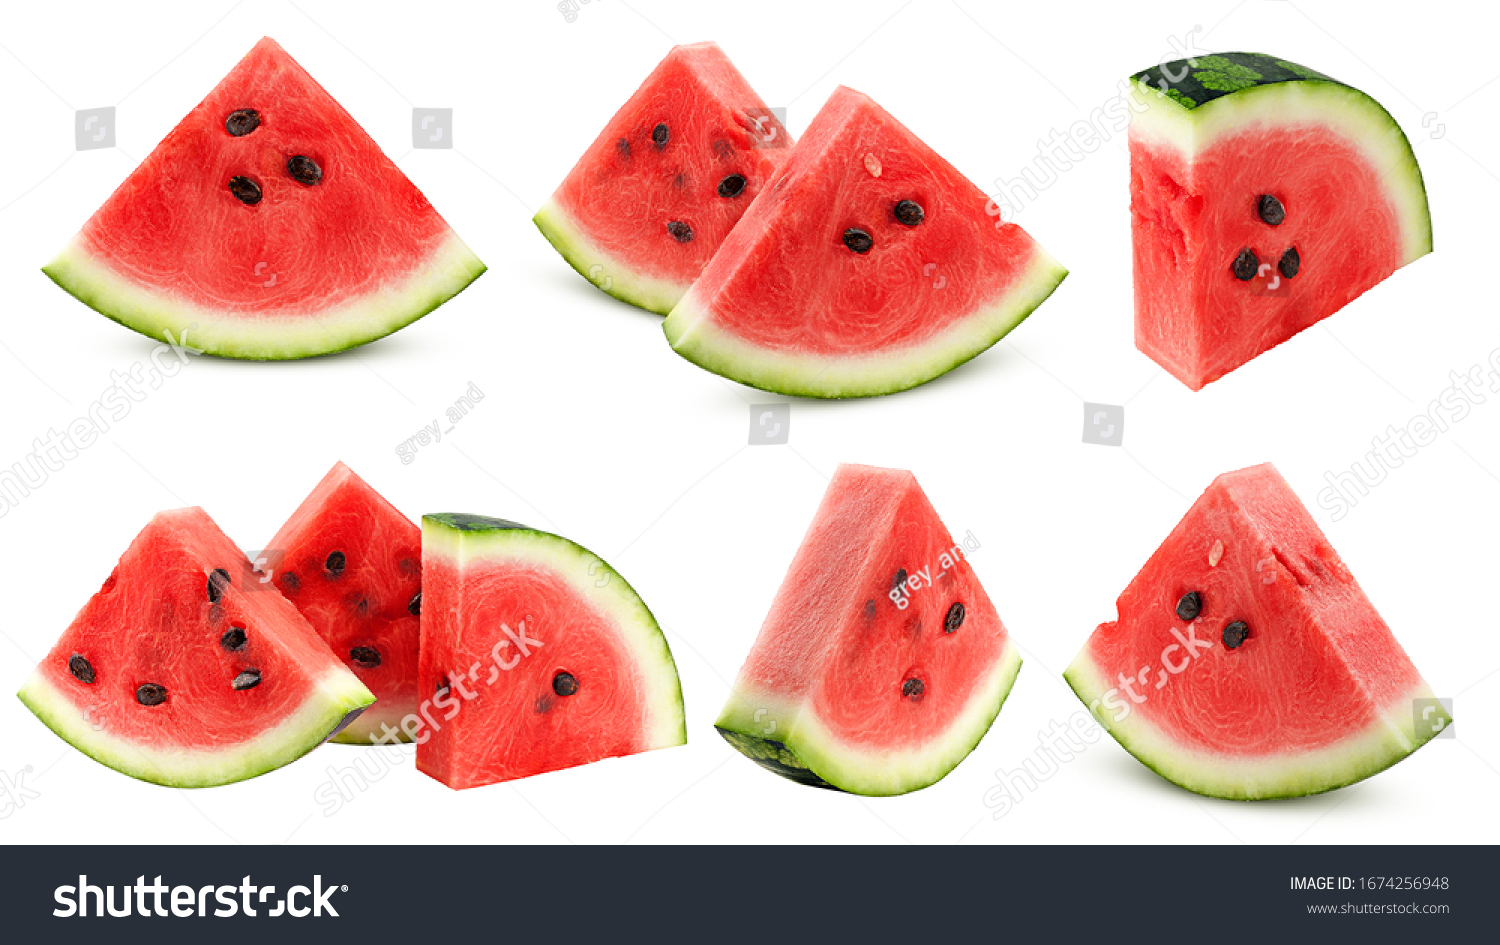 watermelon isolated on white background, clipping path, full depth of field #1674256948